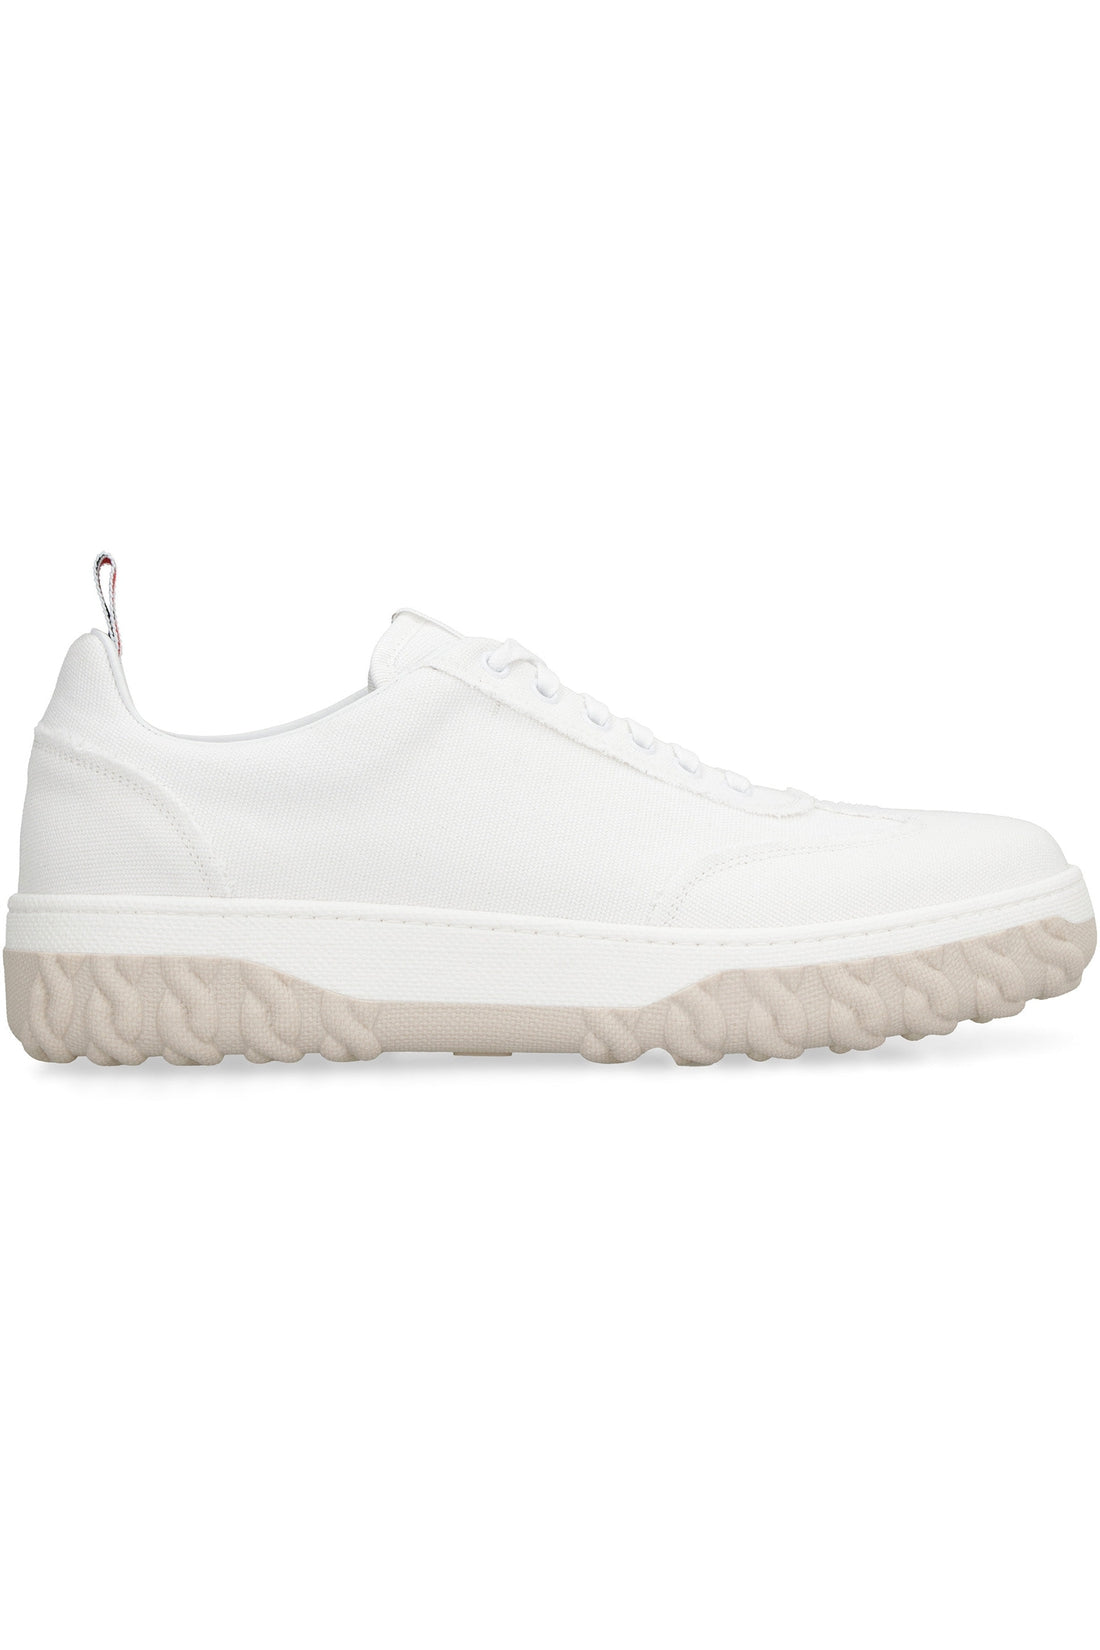 Thom Browne-OUTLET-SALE-Field canvas sneakers-ARCHIVIST